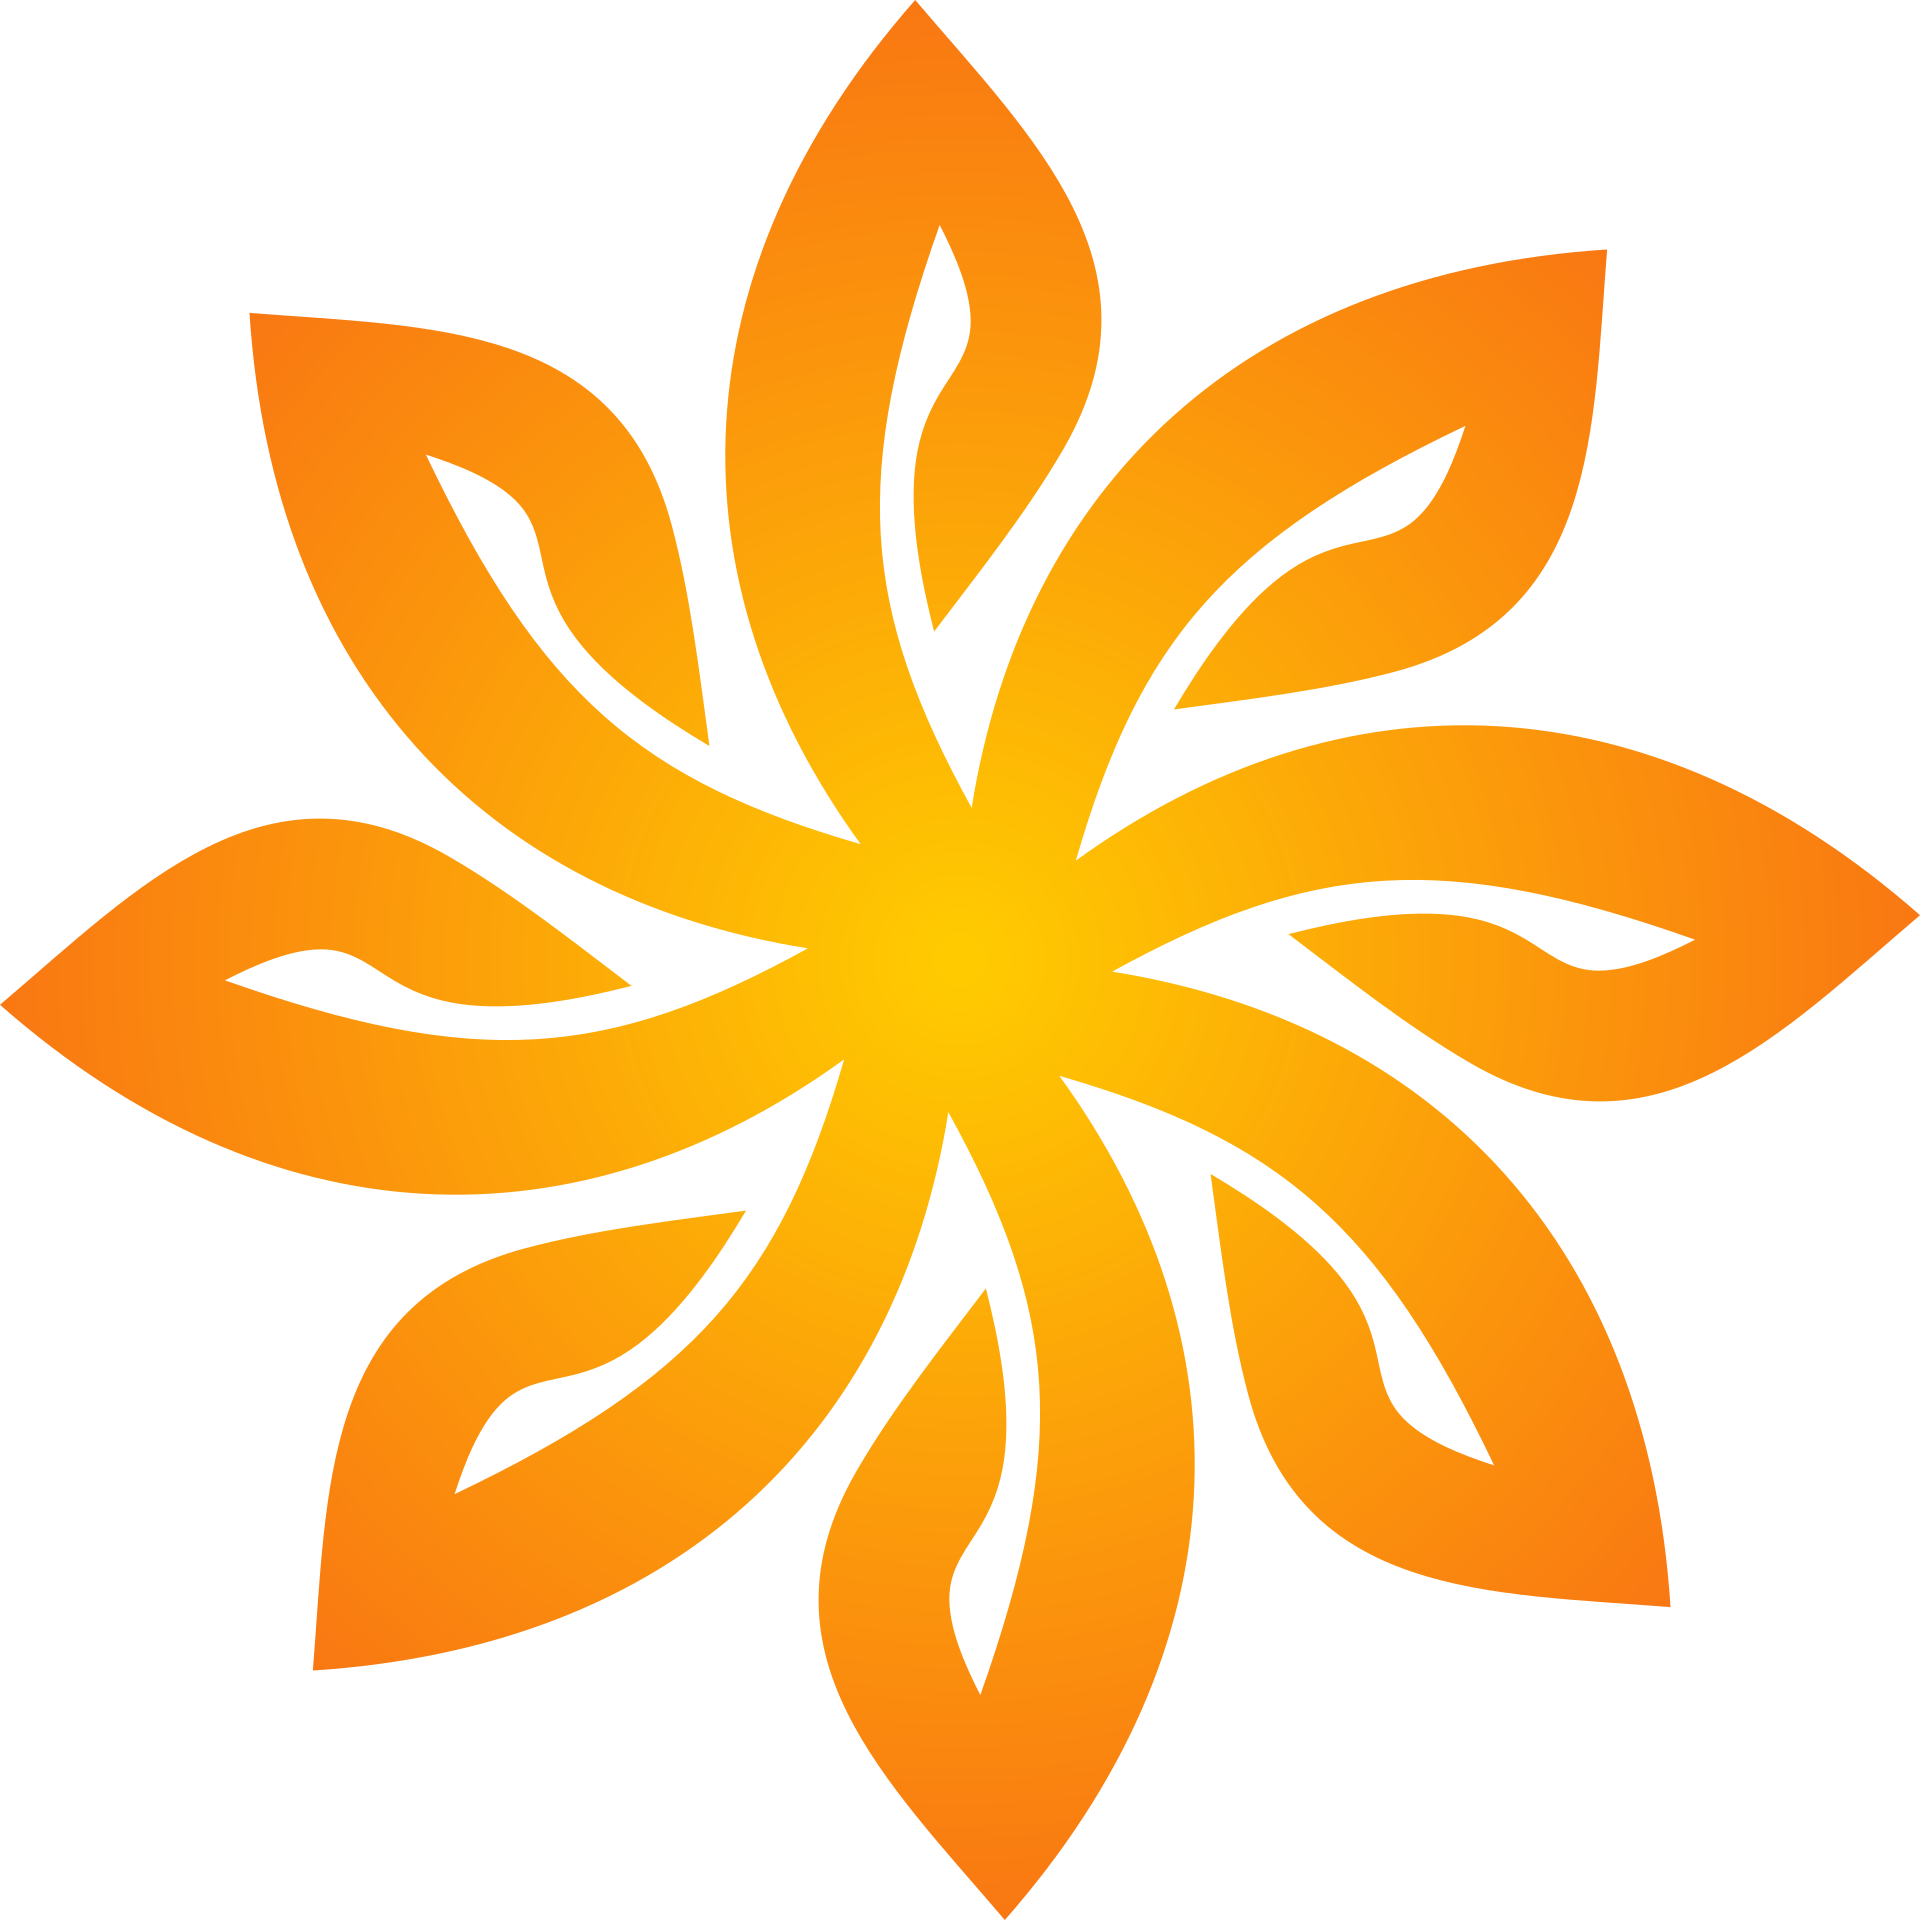 An orange flower-type graphic with 8 petals reflecting the domains and competencies